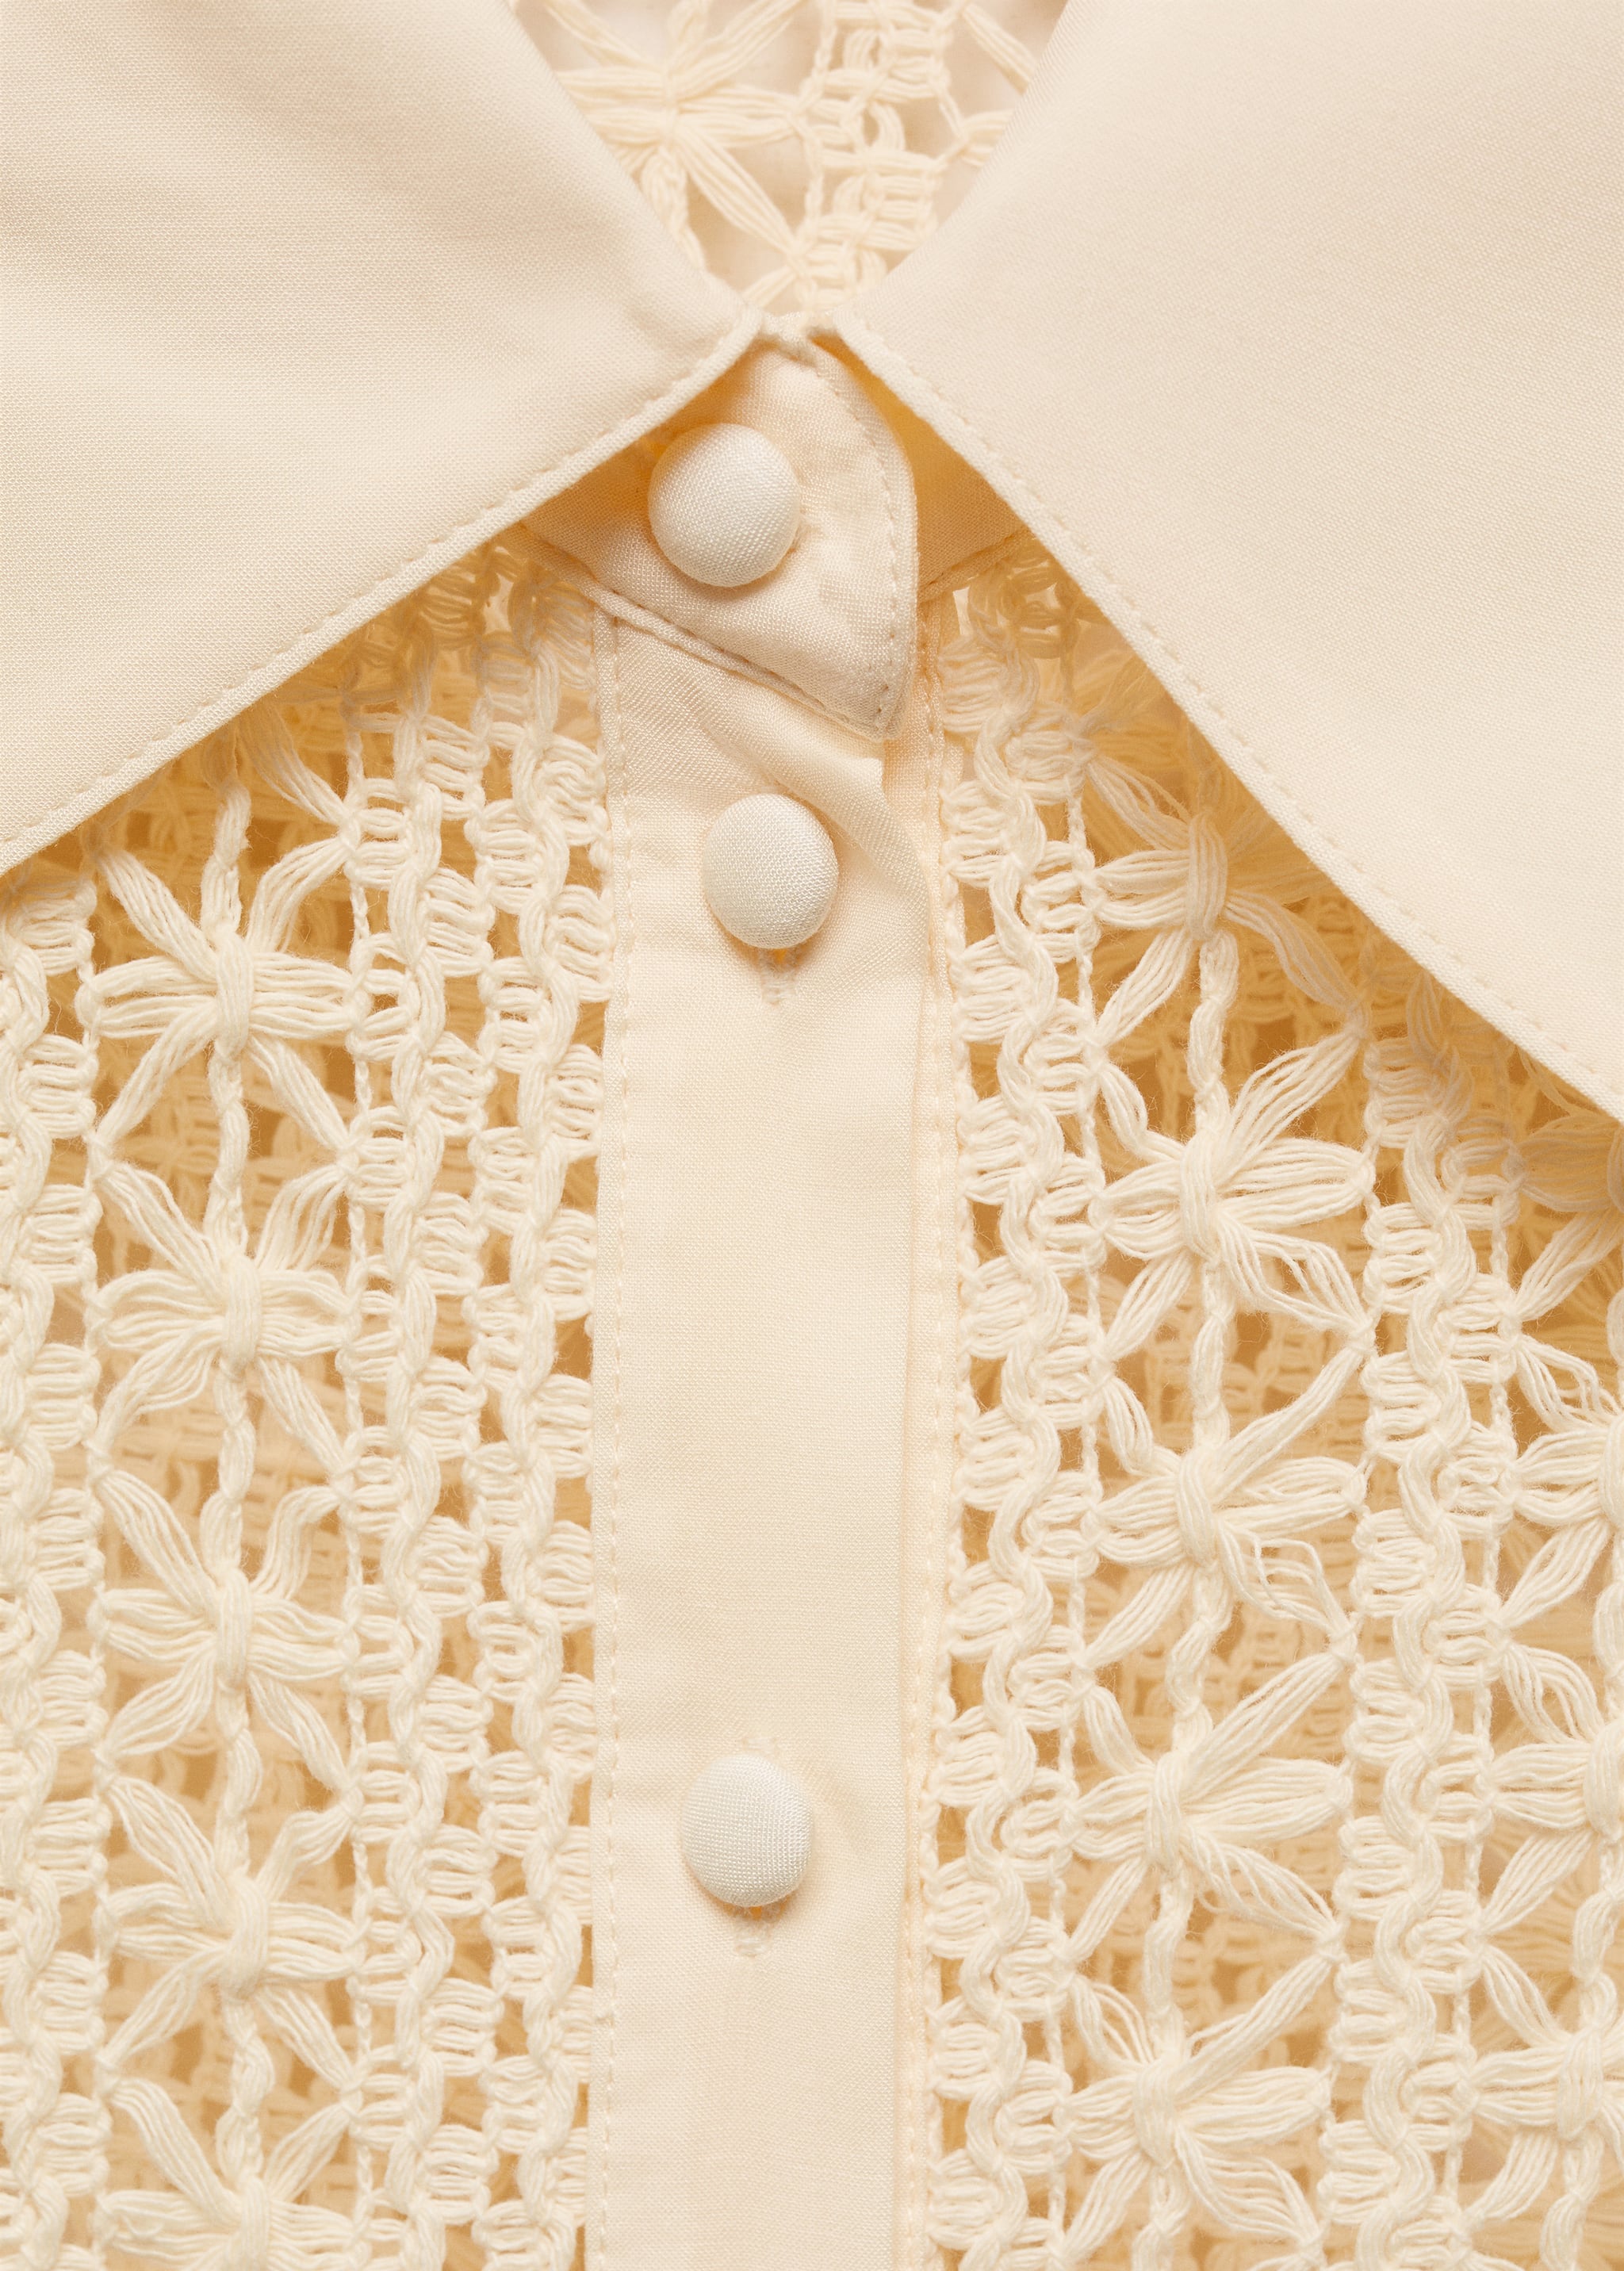 Crochet shirt - Details of the article 8